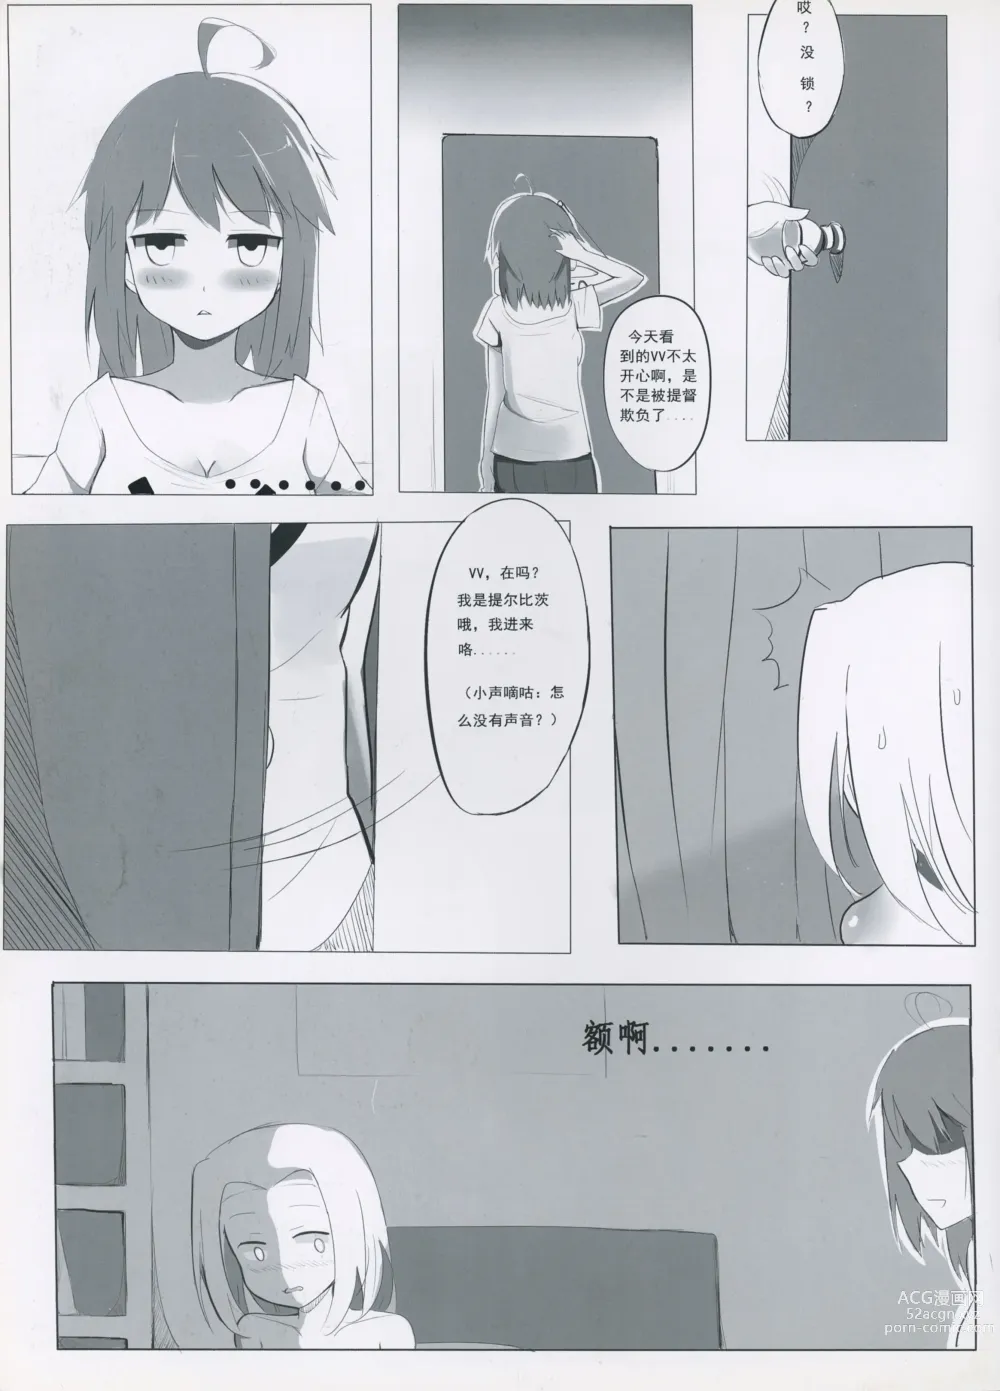 Page 9 of doujinshi The Daily Of Girls